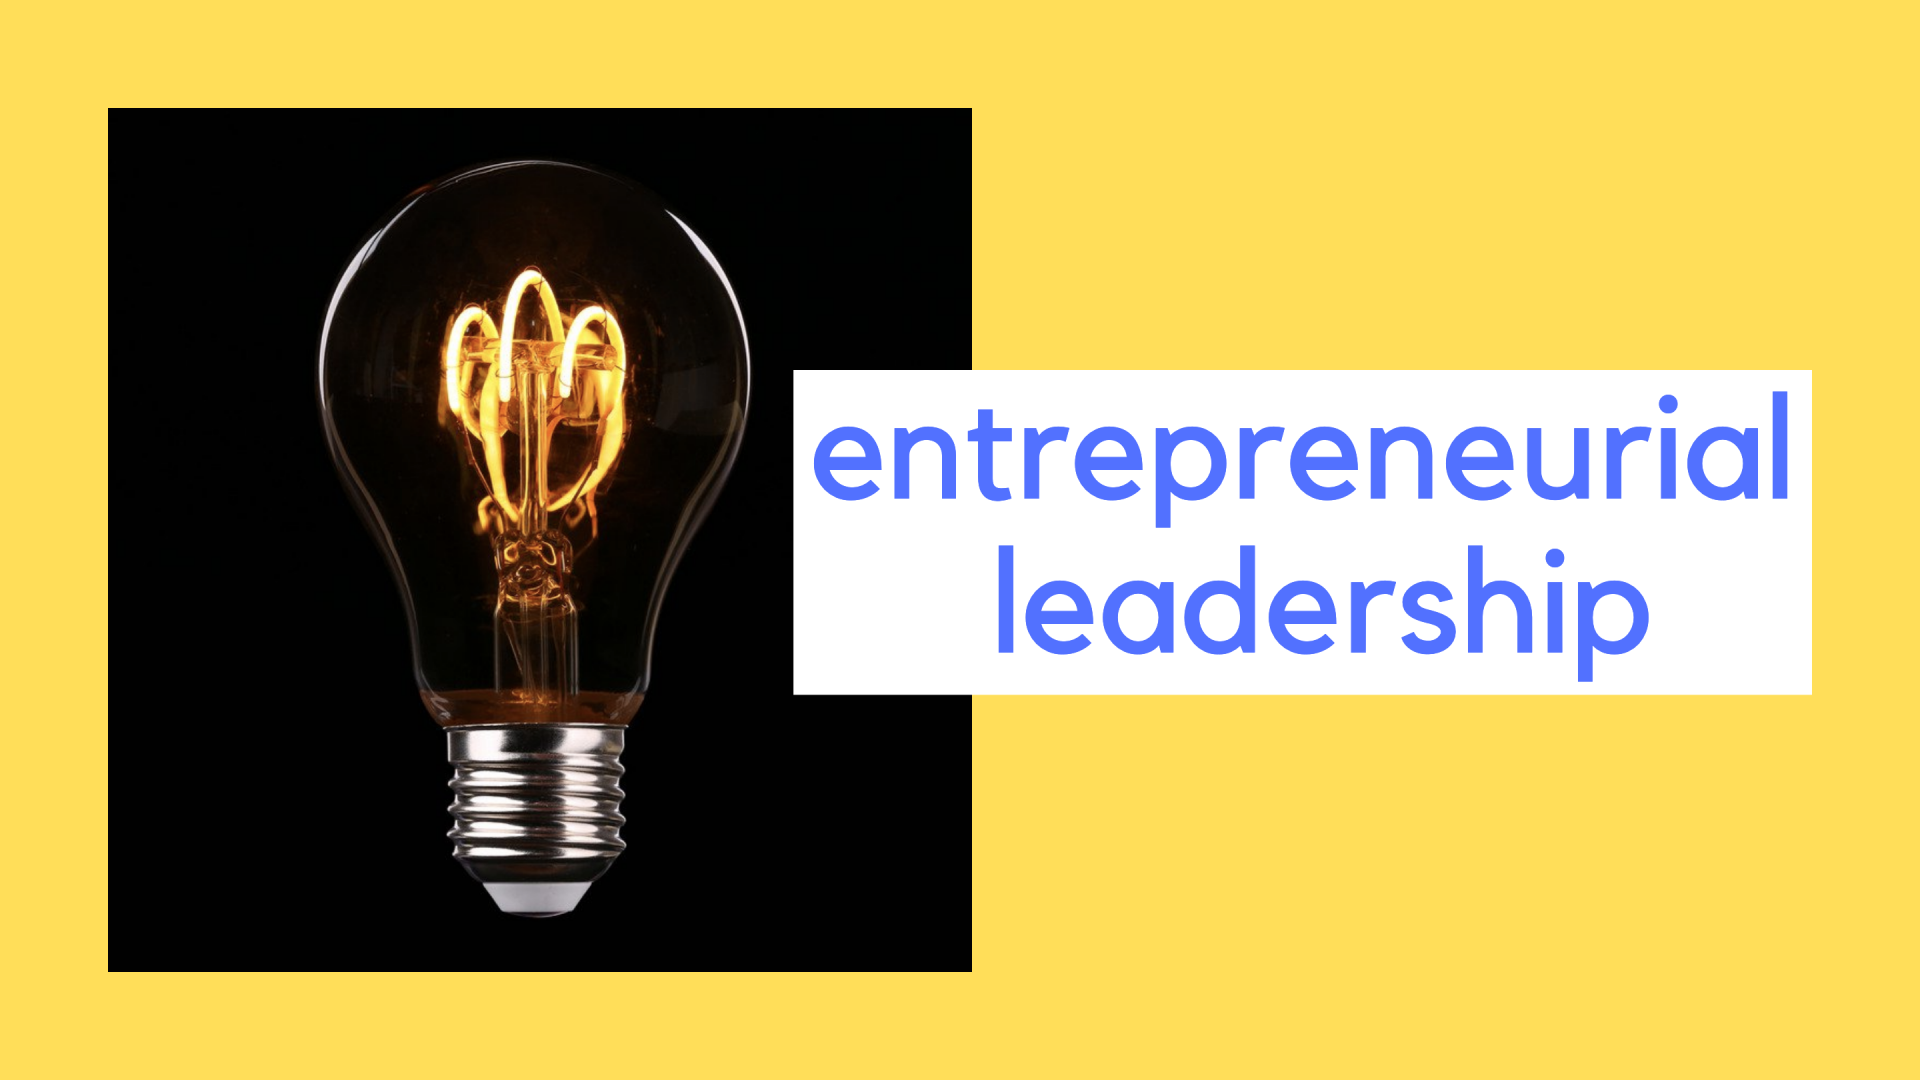 entrepreneurial leadership title with a picture of a lightbulb to the right